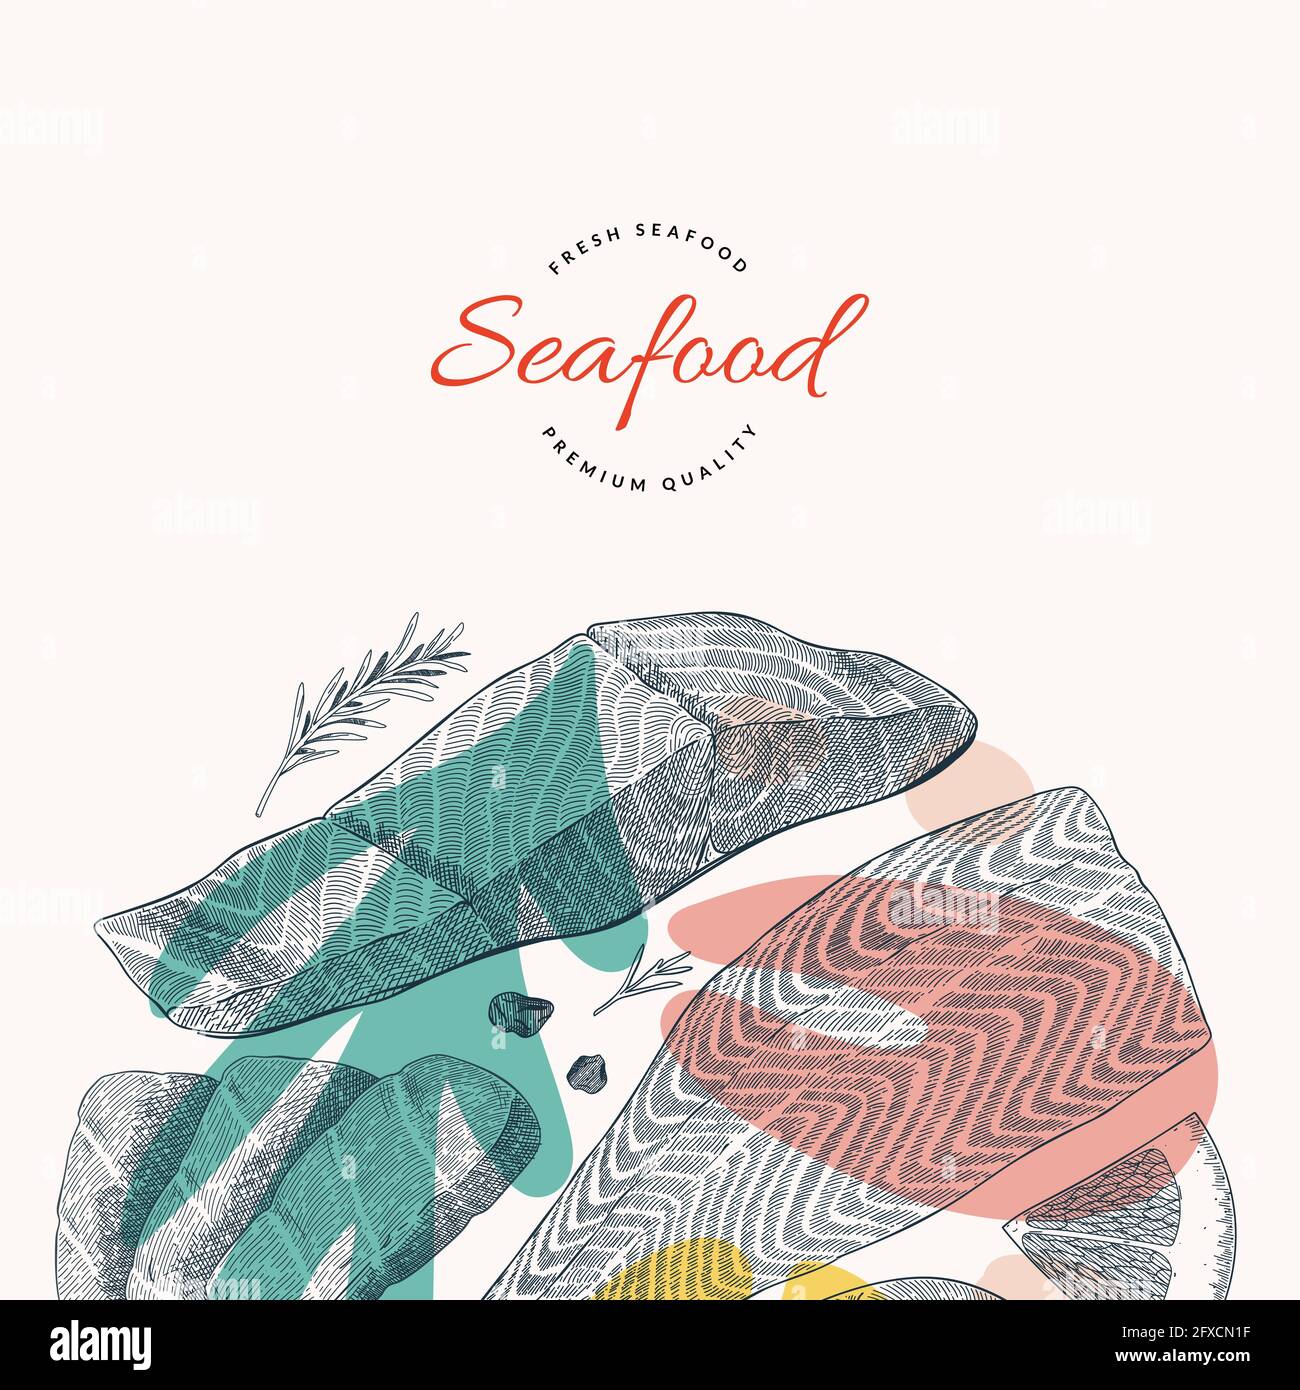 Salmon fish illustration, vector template with hand drawn art of salmon fillet and steak, culinary ongredients, bannerr or card design Stock Vector